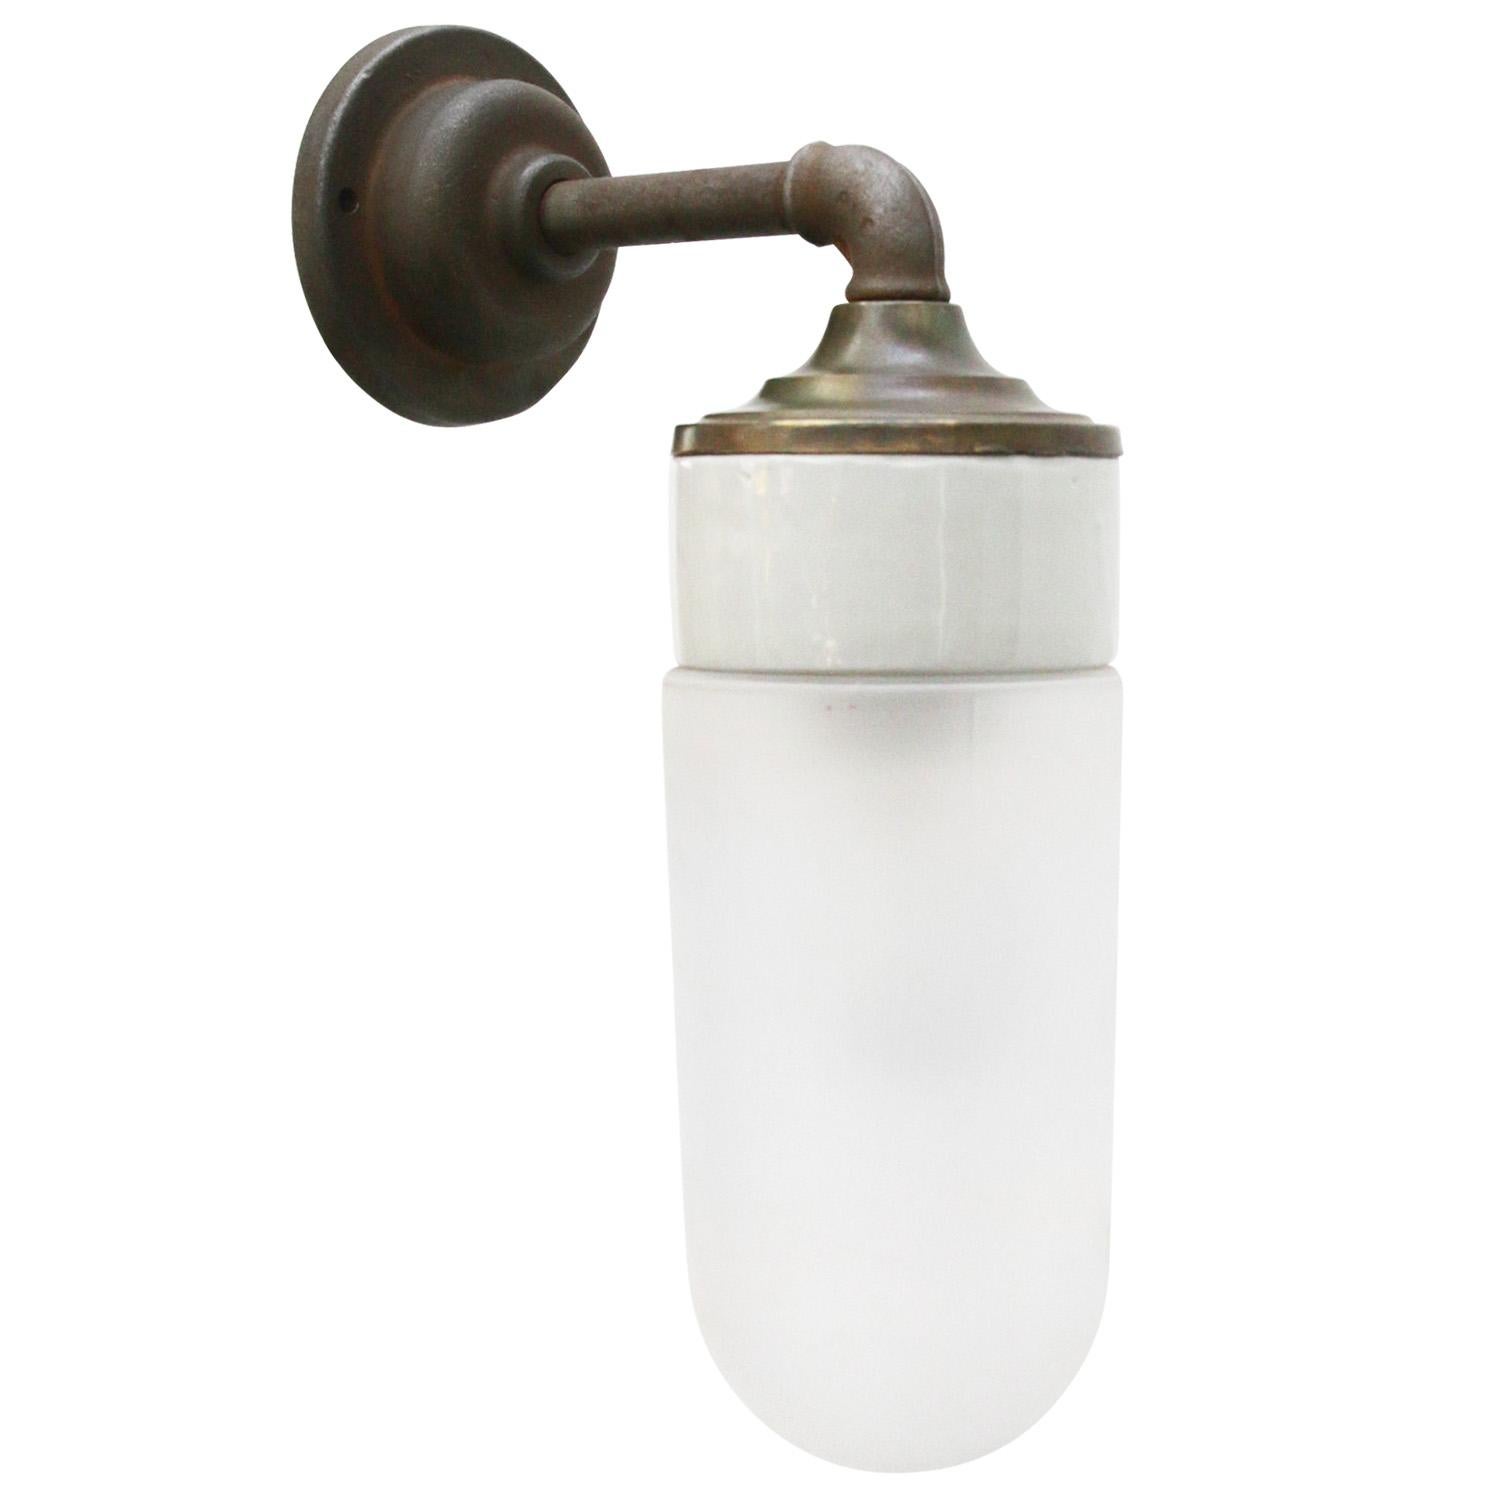 Porcelain Industrial wall lamp.
White porcelain, brass and cast iron
Frosted glass.
2 conductors, no ground.

Diameter wall mount 10.5 cm / 4”.
2 holes to secure.

For use inside only

Weight: 2.10 kg / 4.6 lb

Priced per individual item. All lamps